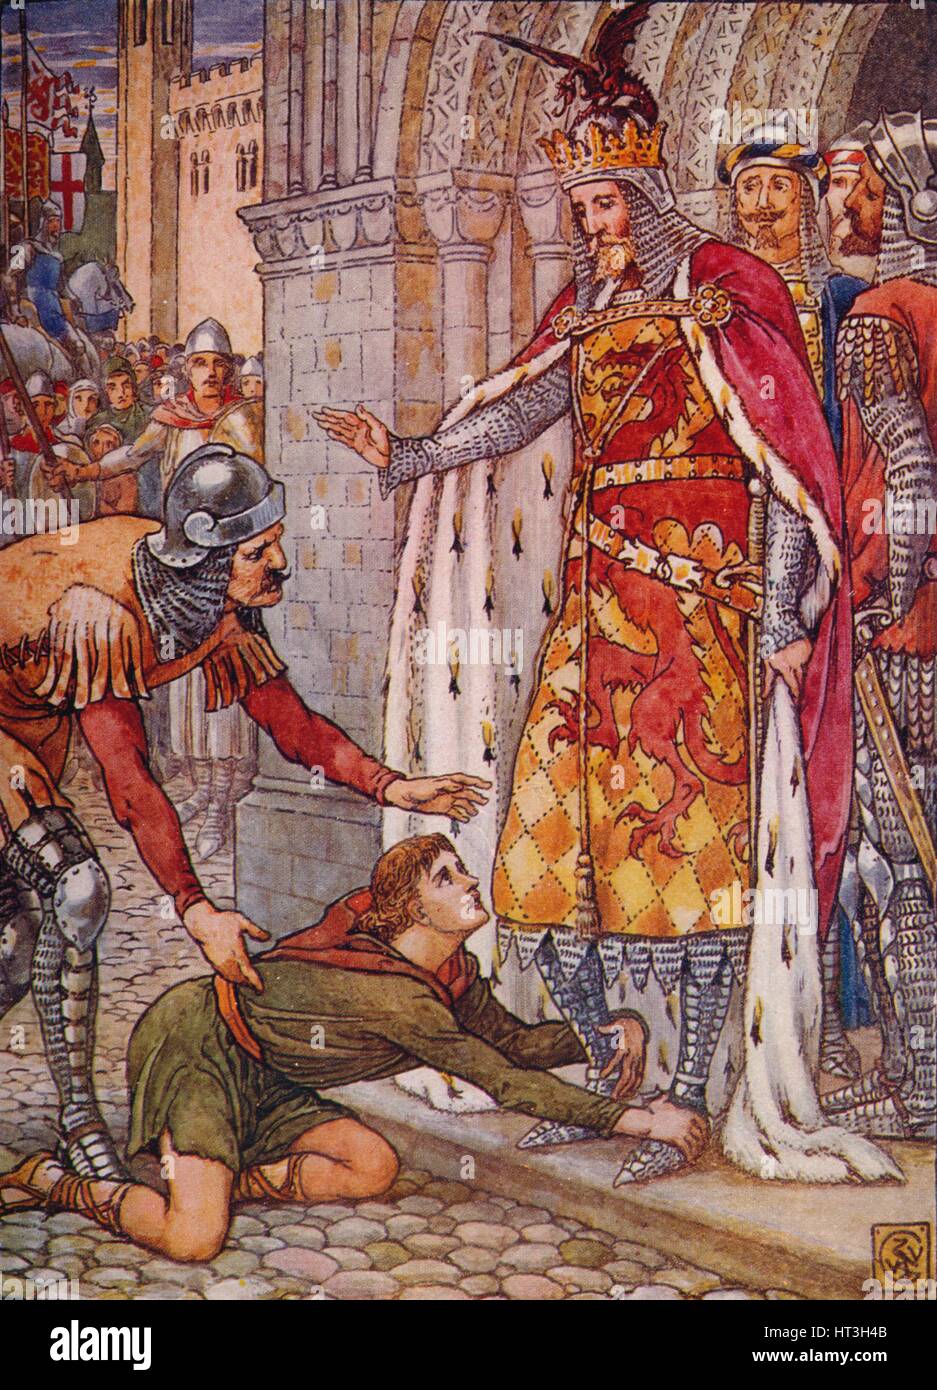 'Young Owen Appeals to the King', 1911.  Artist: Walter Crane. Stock Photo